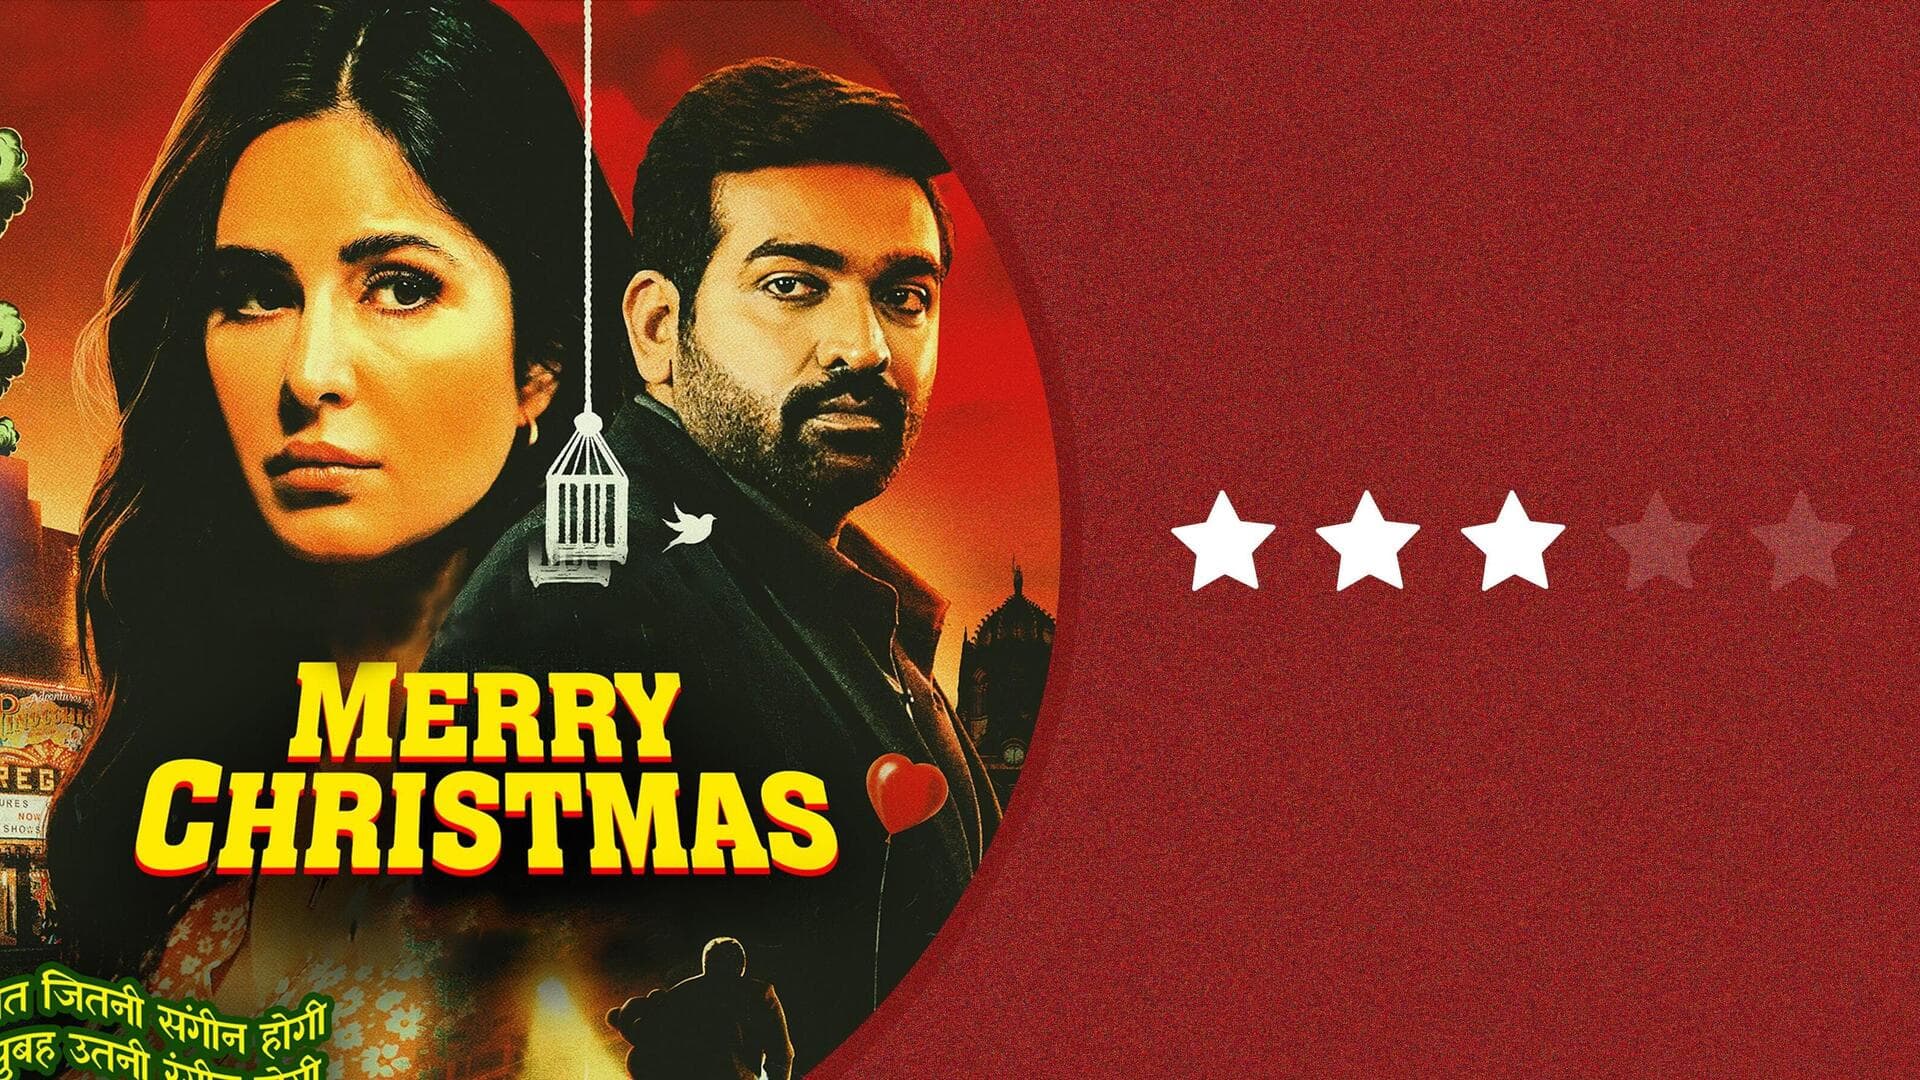 'Merry Christmas' (Hindi) review: Slow-burn thriller is engaging, not flawless